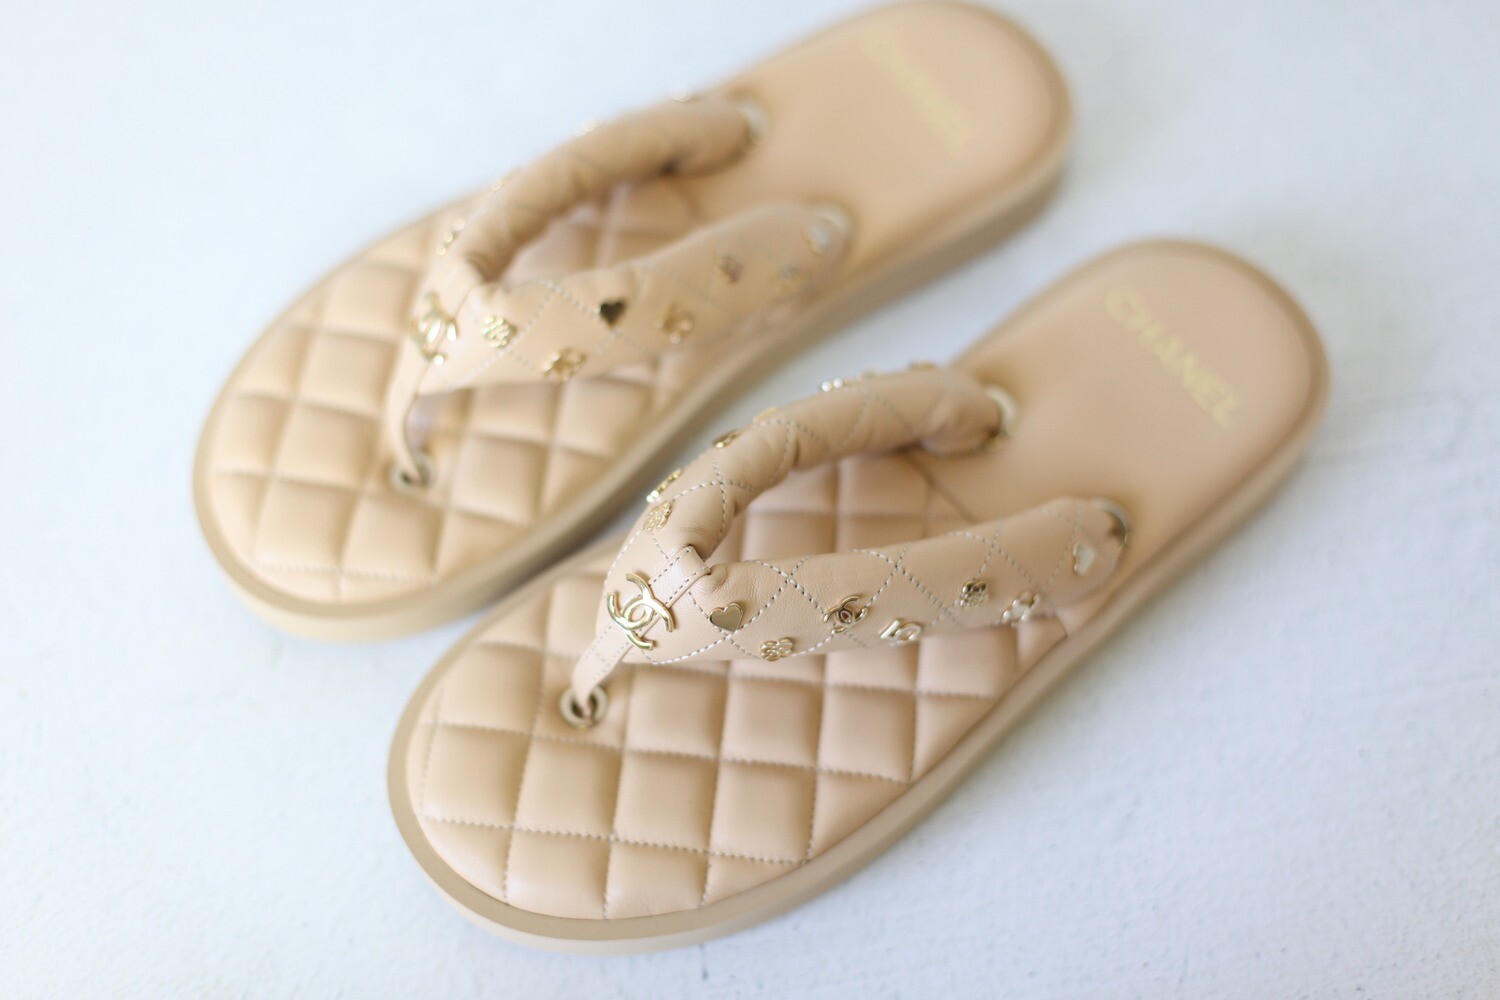 Chanel Charms Thong Sandals, Size 42, Beige Leather, New in Box WA001